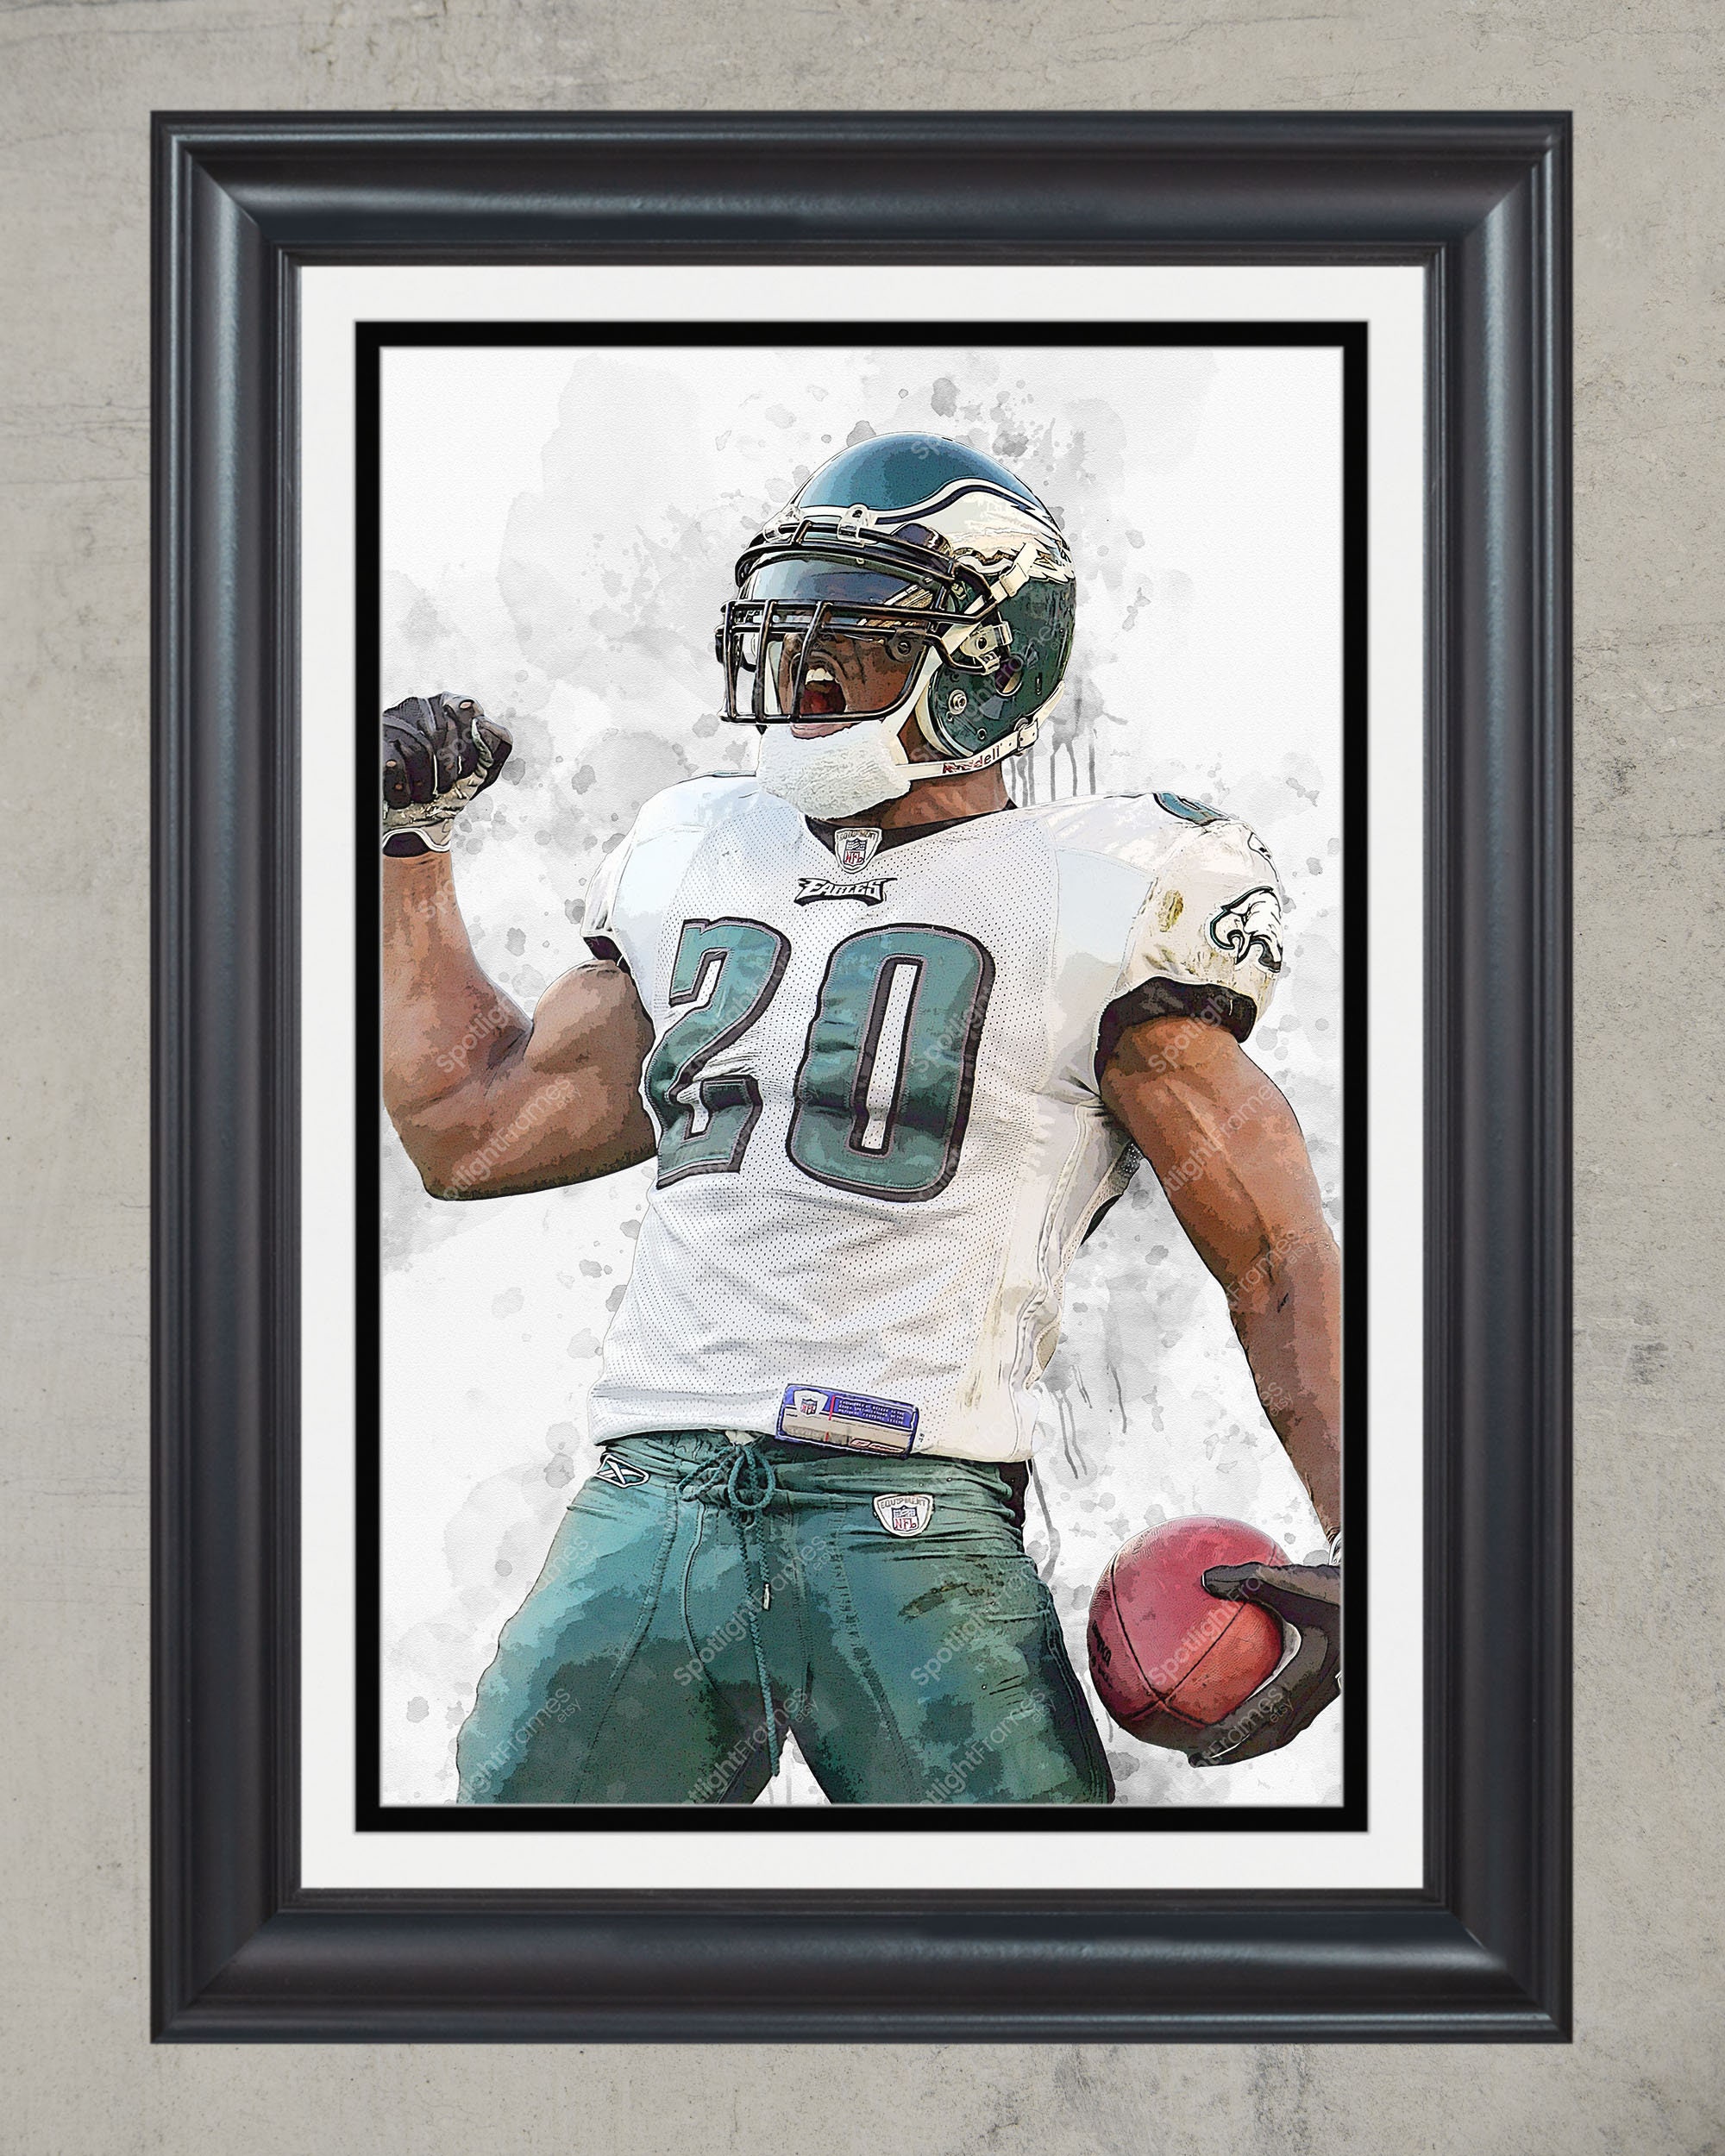 Brian Dawkins Philadelphia Eagles Autographed 16x20 Framed Collage Photo -  Hall of Fame, Weapon X